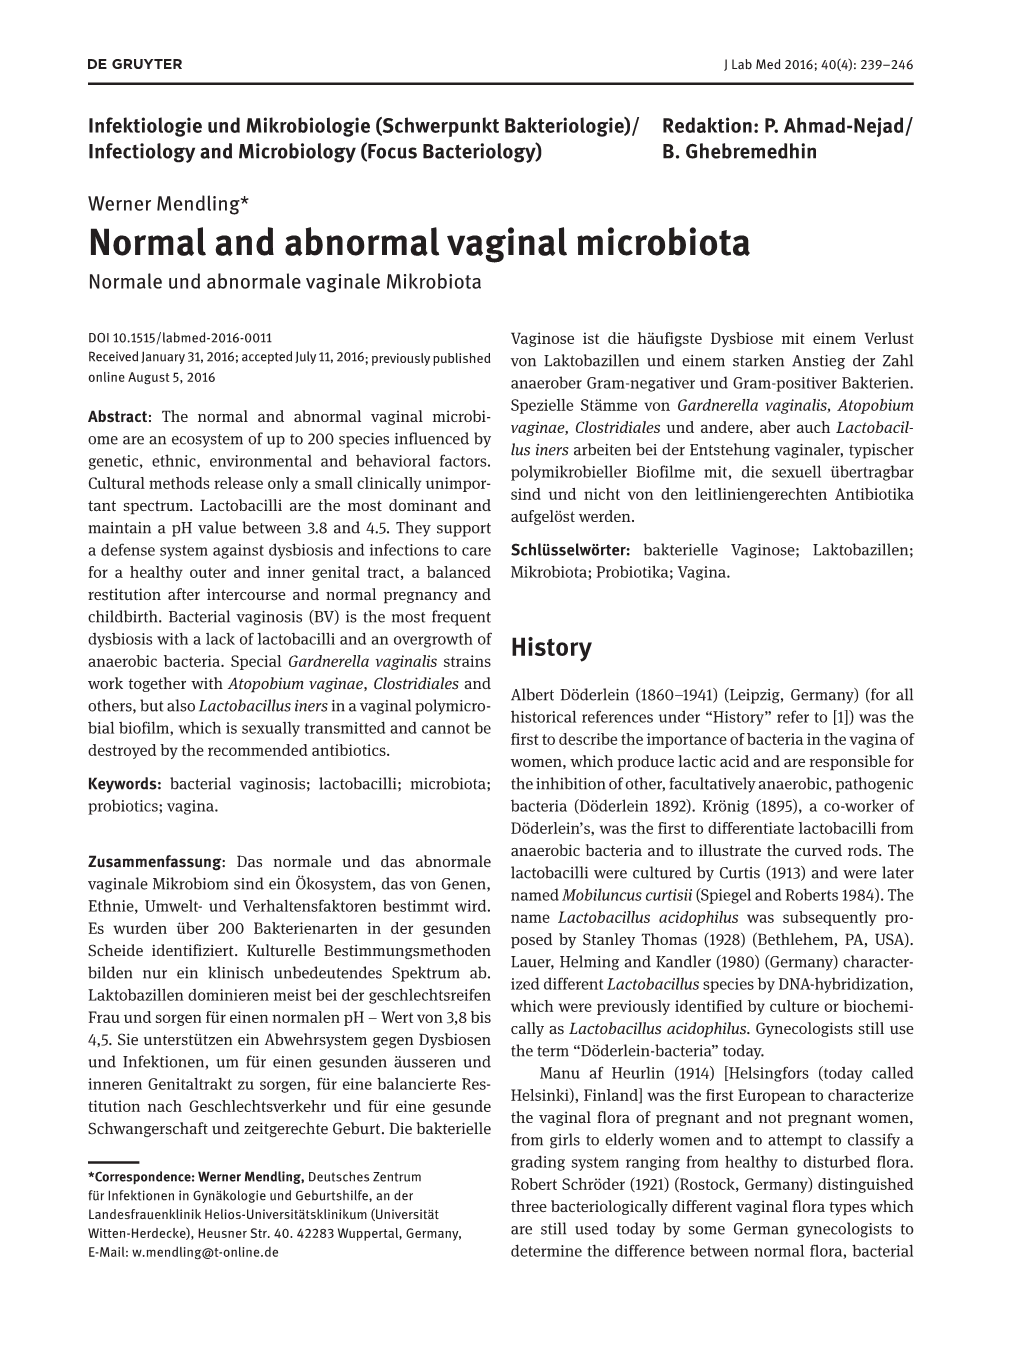 Normal and Abnormal Vaginal Microbiota Normale Und Abnormale Vaginale Mikrobiota